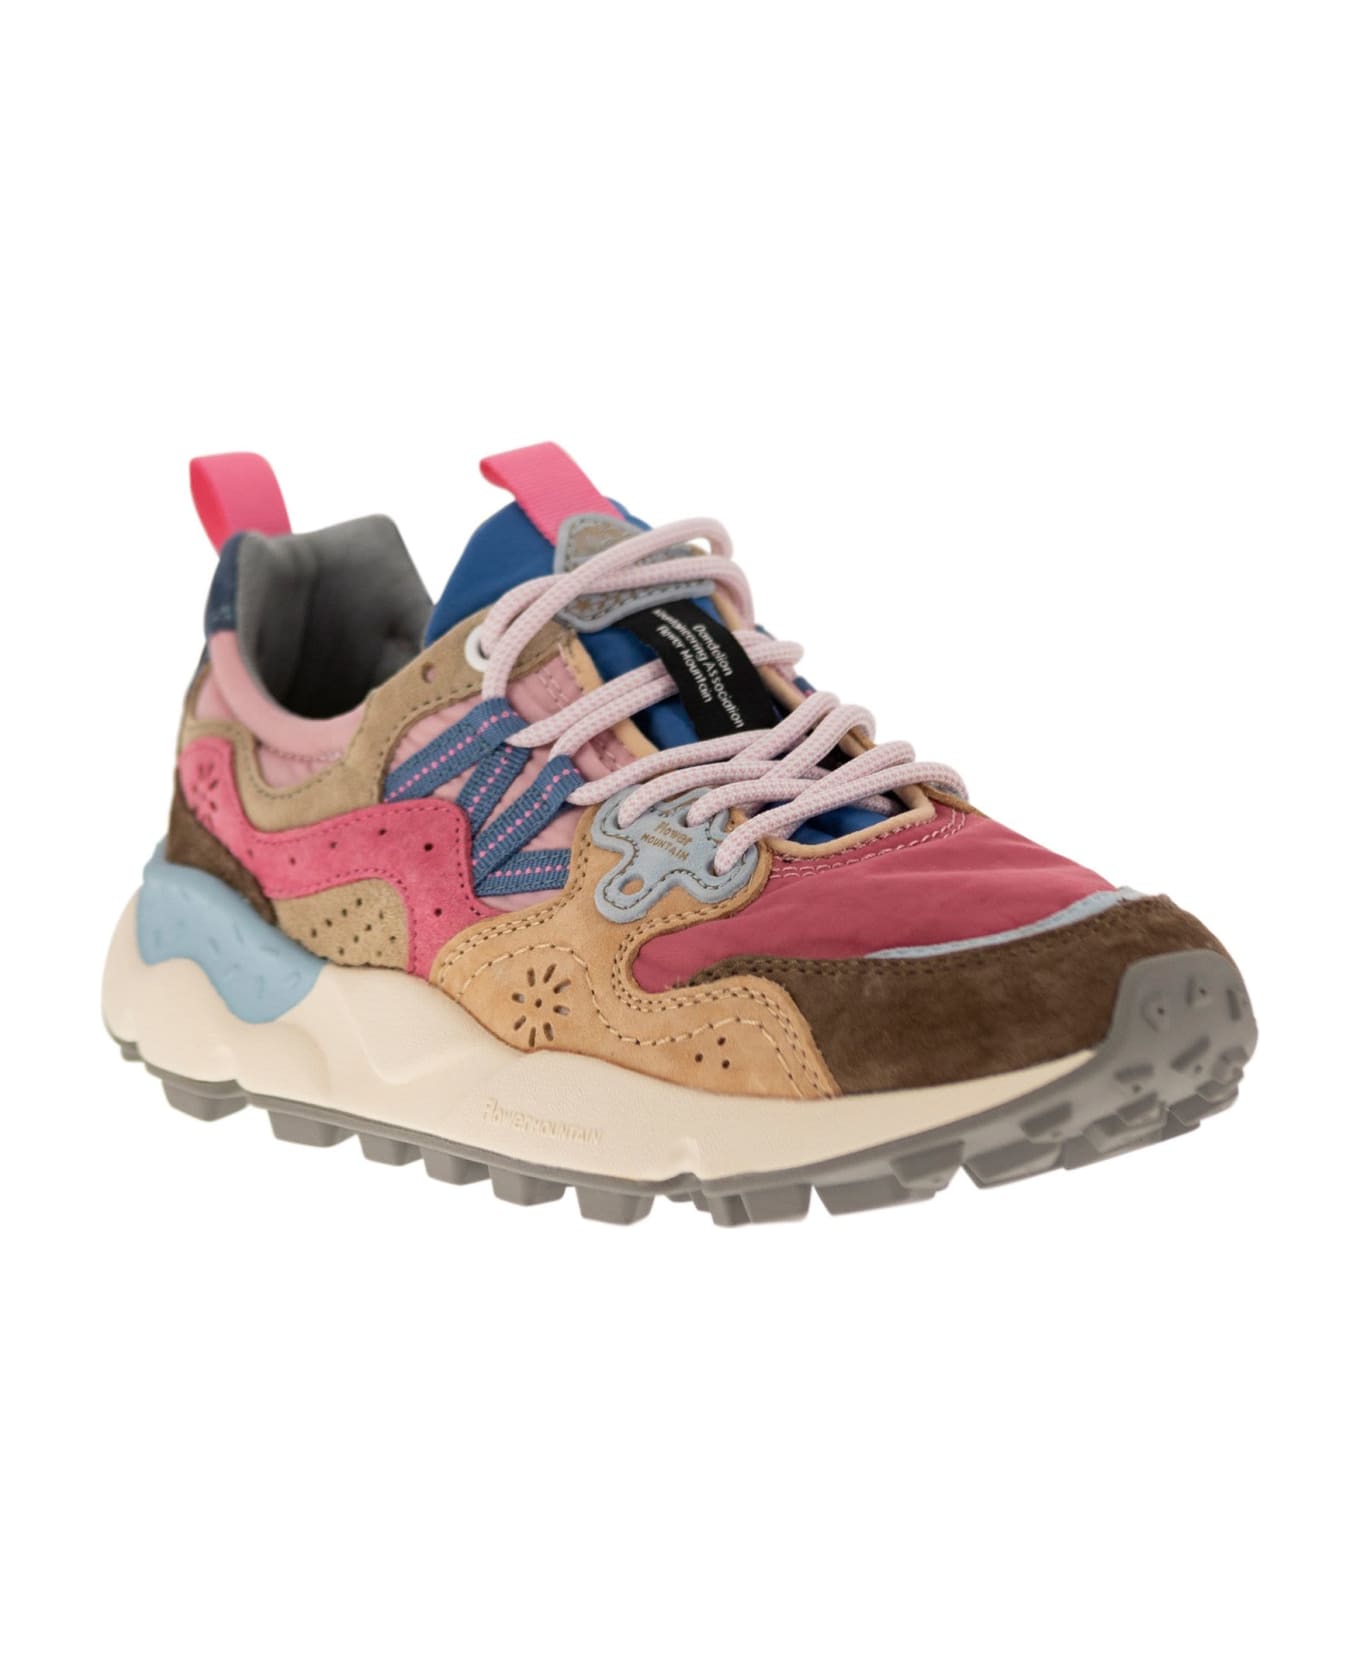 Flower Mountain Yamano 3 - Sneakers In Suede And Technical Fabric - Pink スニーカー